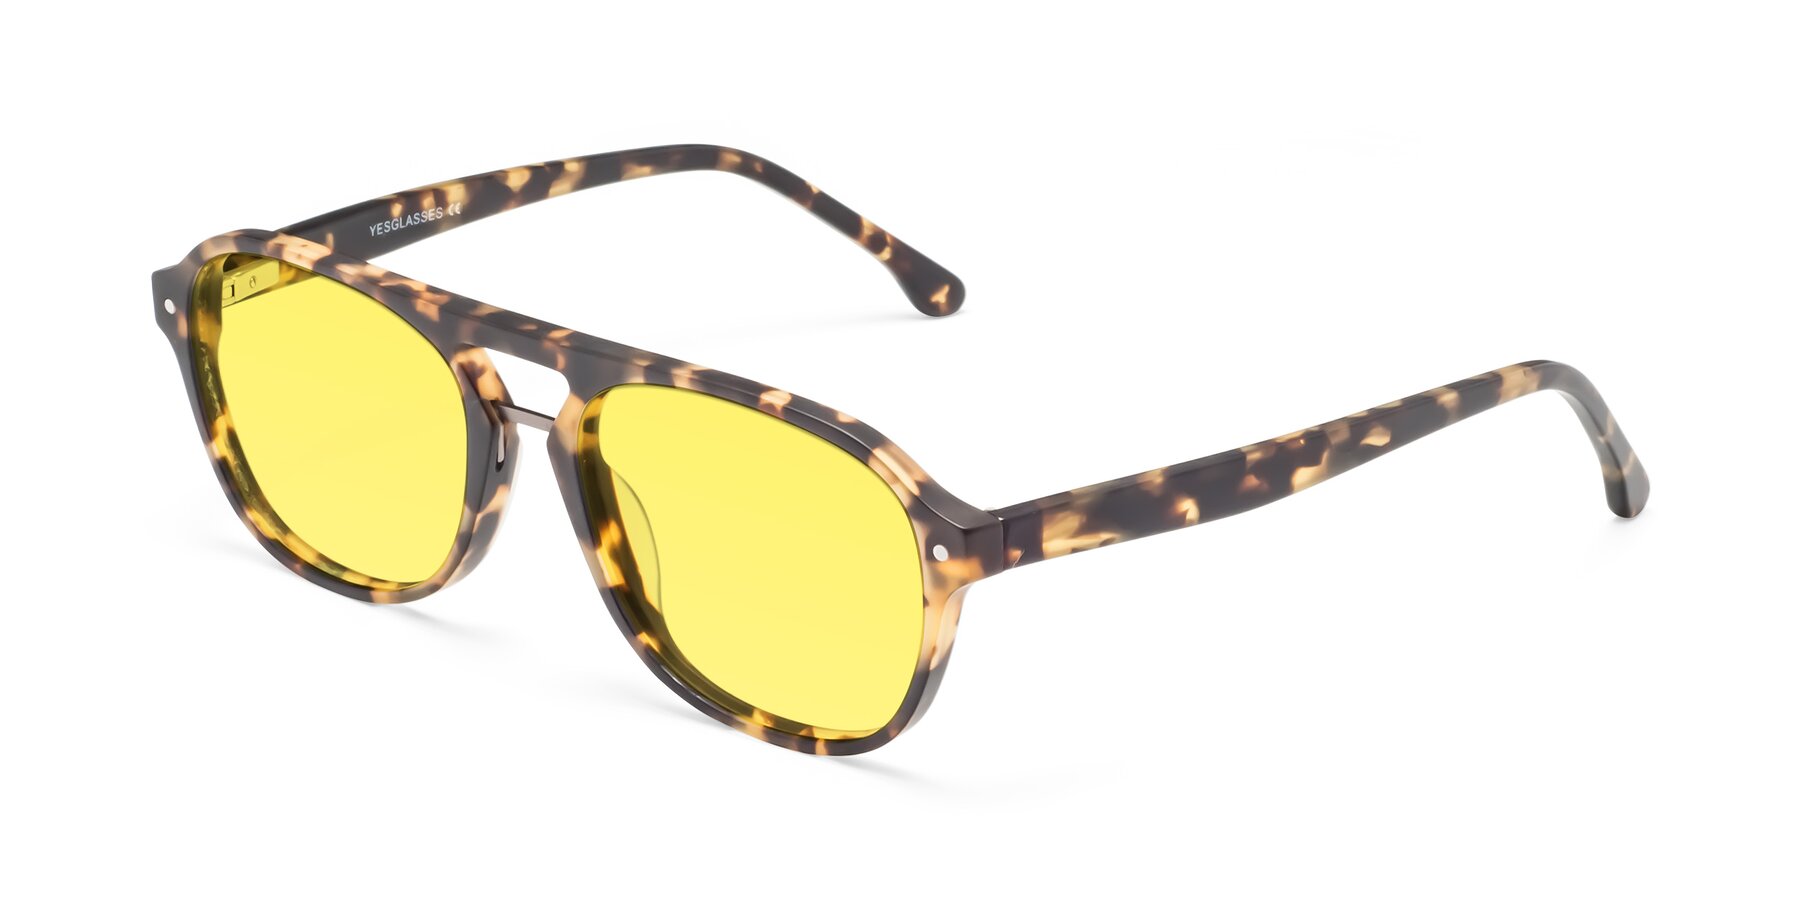 Angle of 17416 in Matte Tortoise with Medium Yellow Tinted Lenses